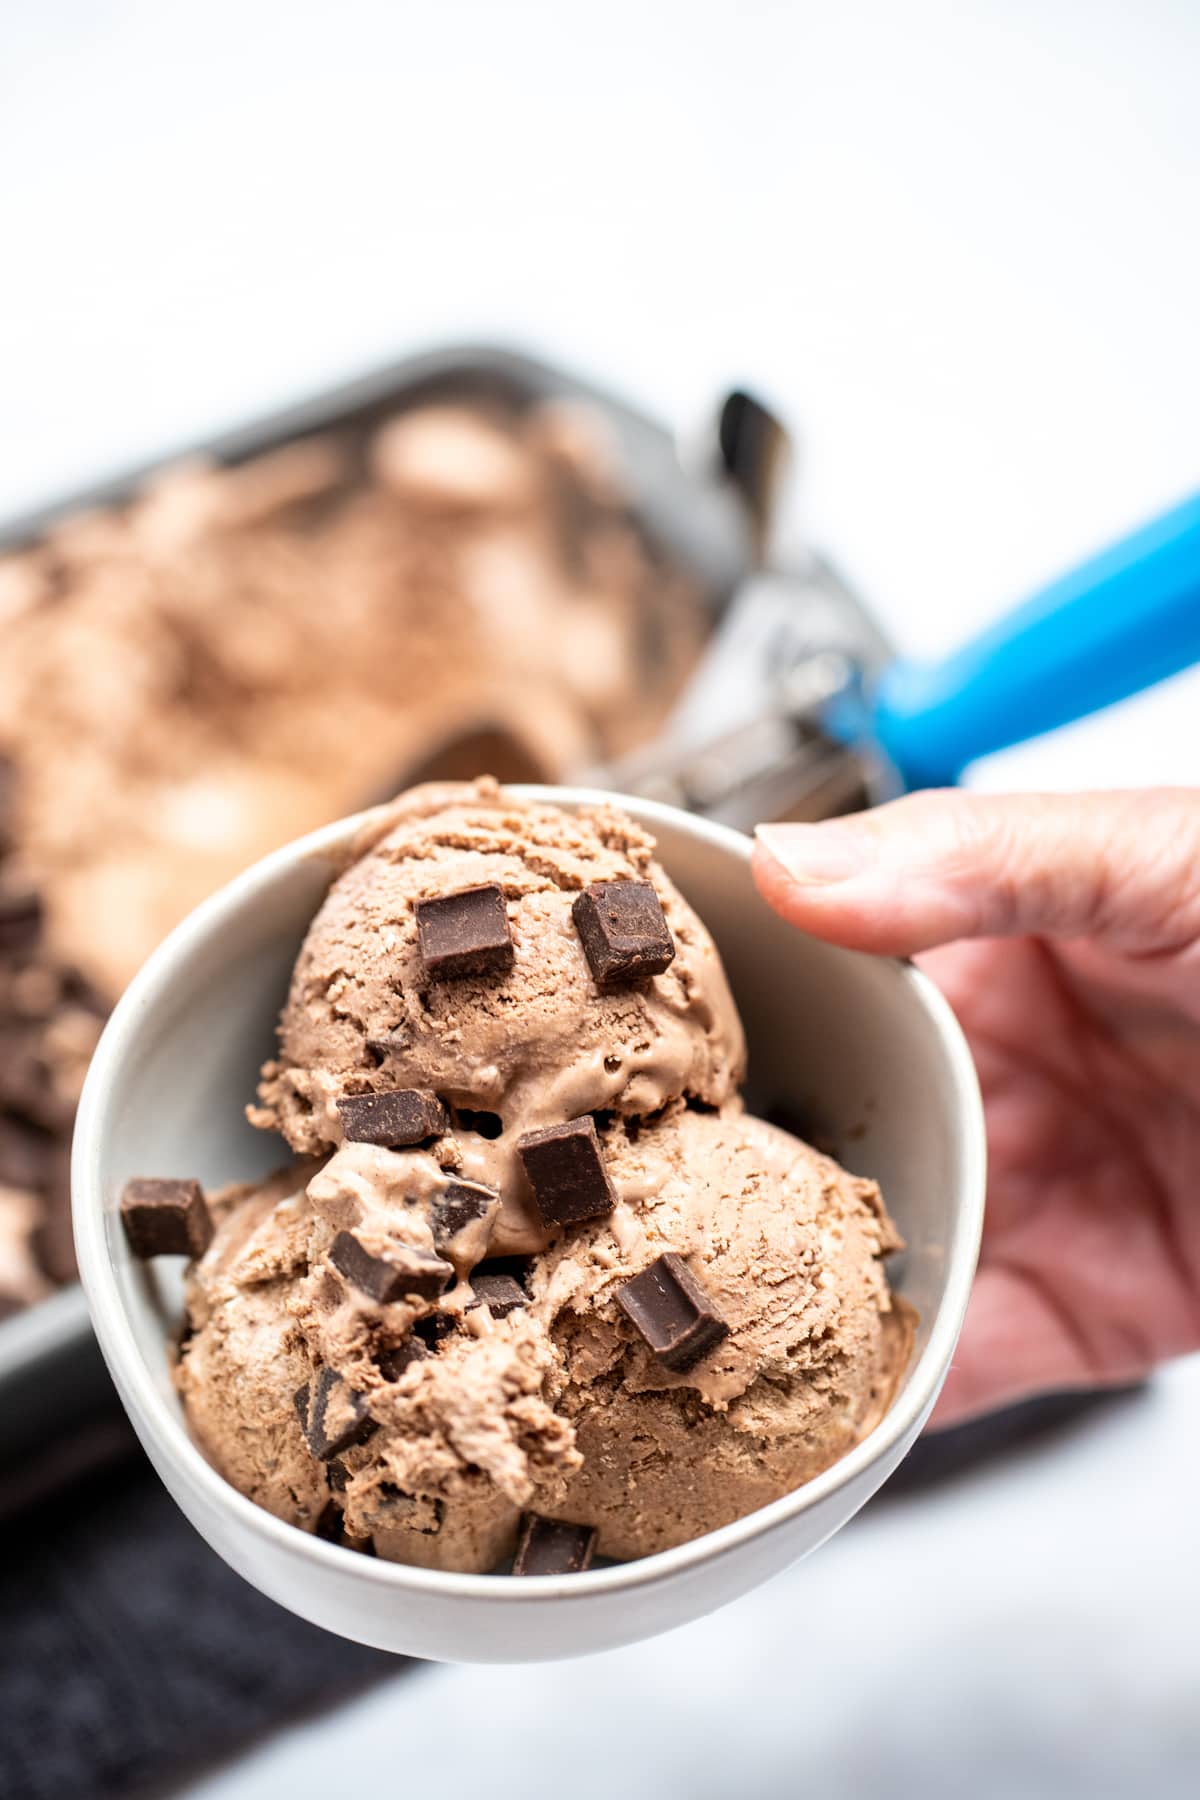 A hand holding a bowl of chocolate ice cream topped with chocolate chunks next to a bread pan of ice cream with an ice cream scoop.